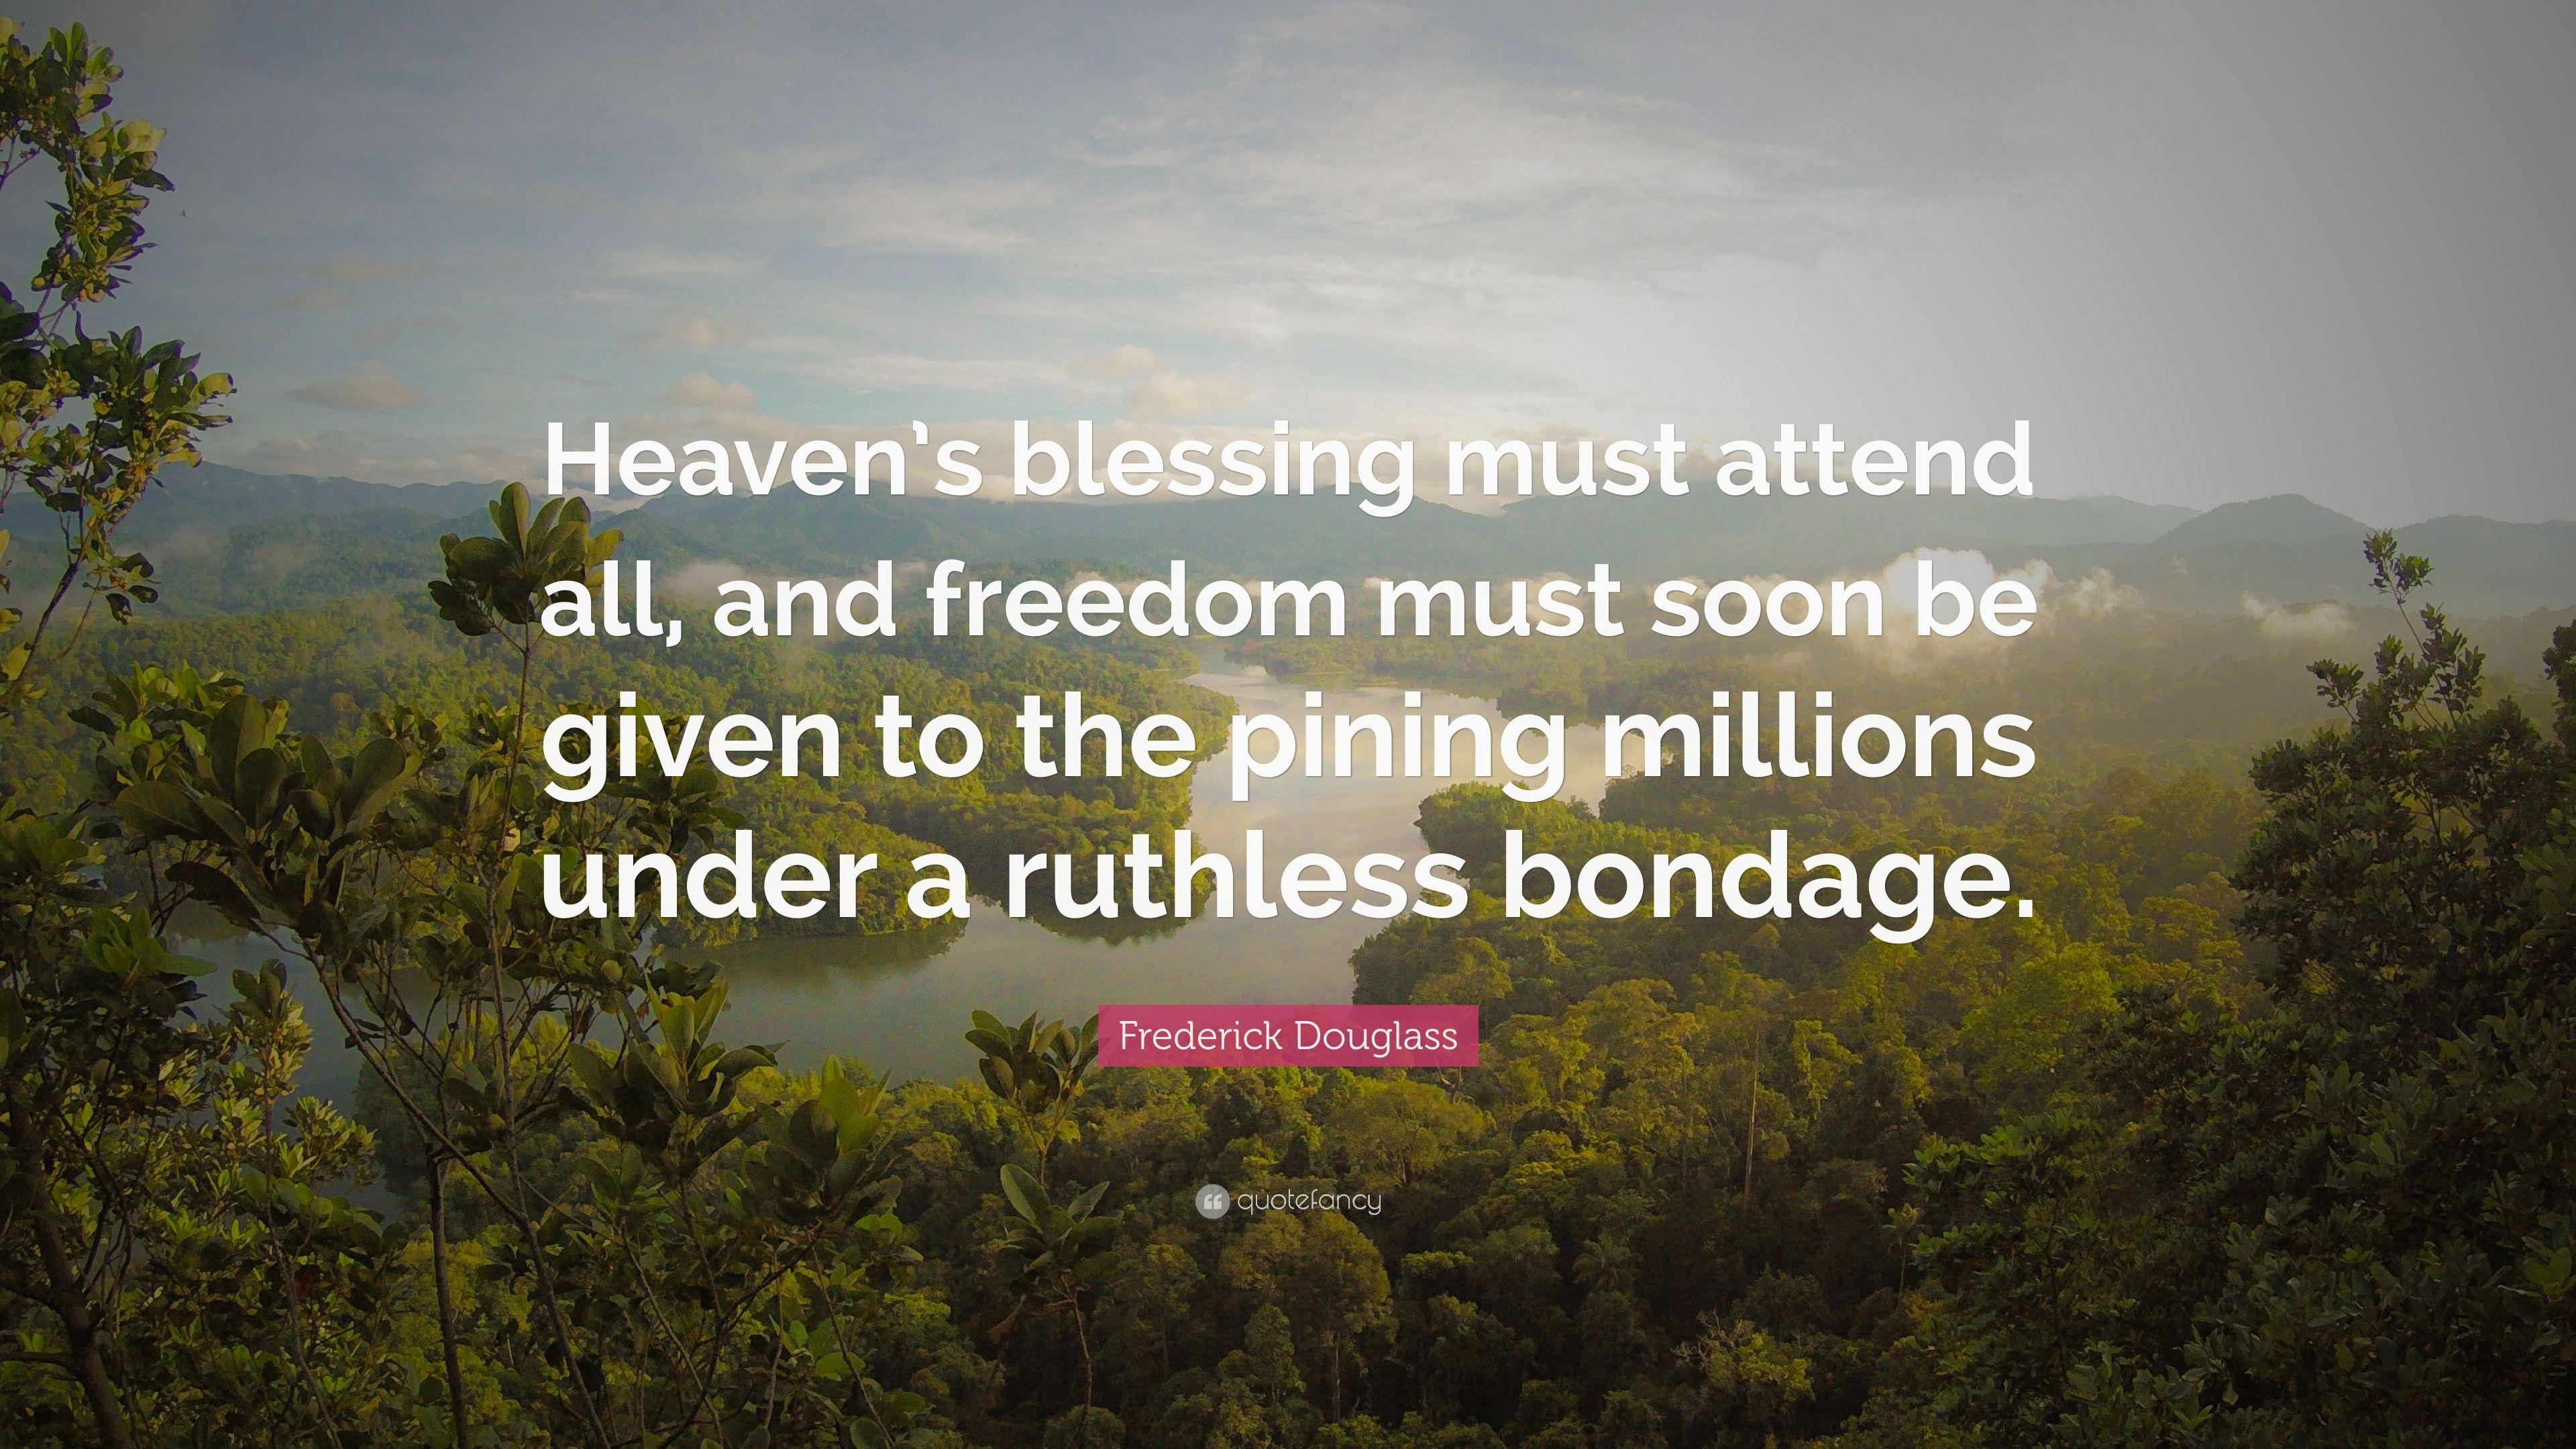 Frederick Douglass Quote: “Heaven's blessing must attend all